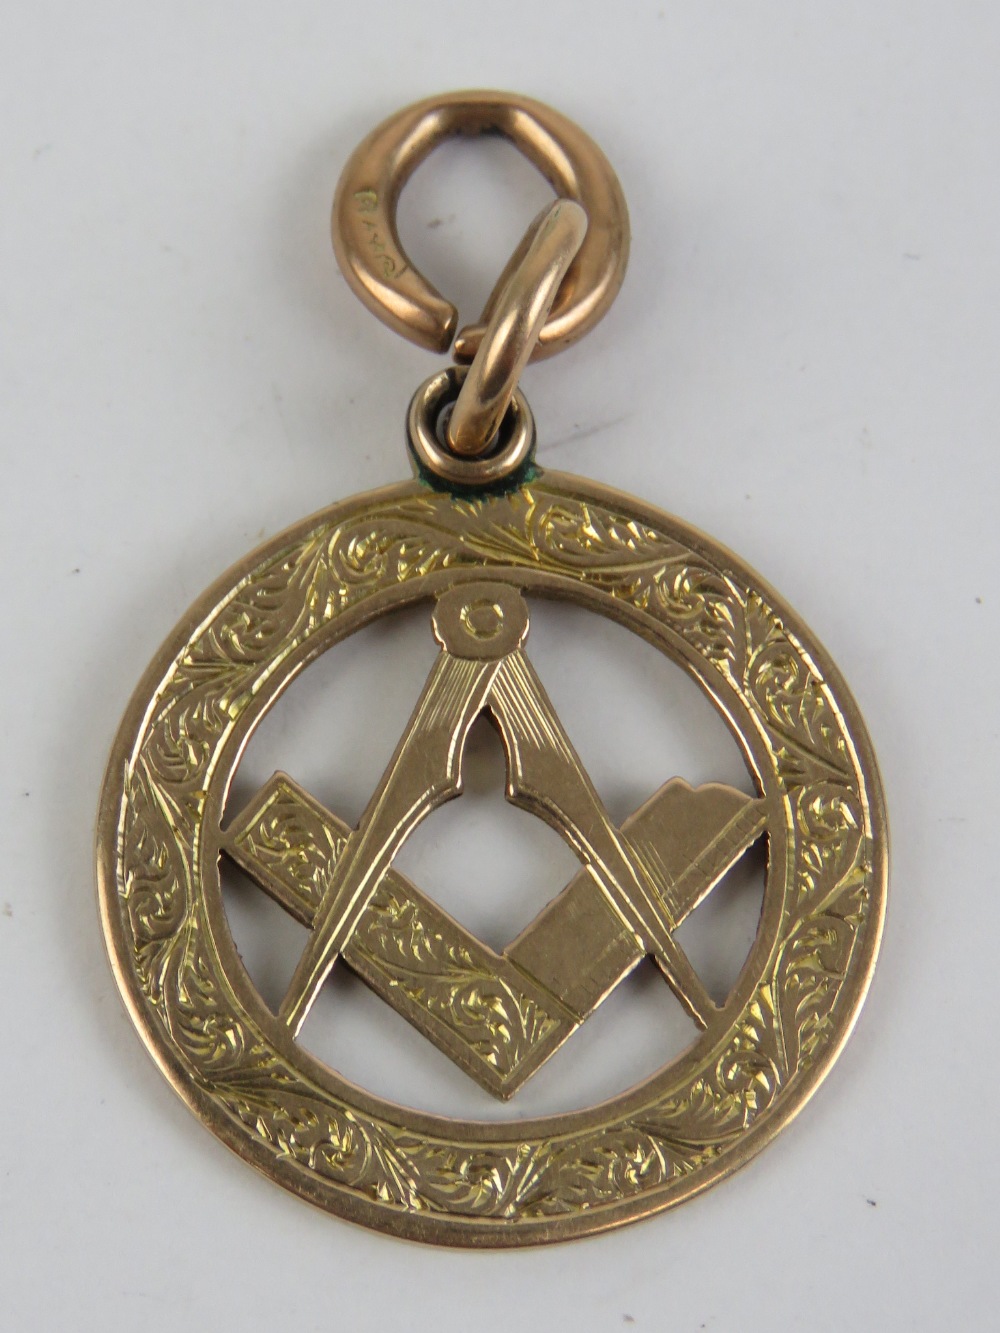 A 9ct rose gold Masonic charm or fob, 24mm dia not inc bale, hallmarked London, 5.5g.